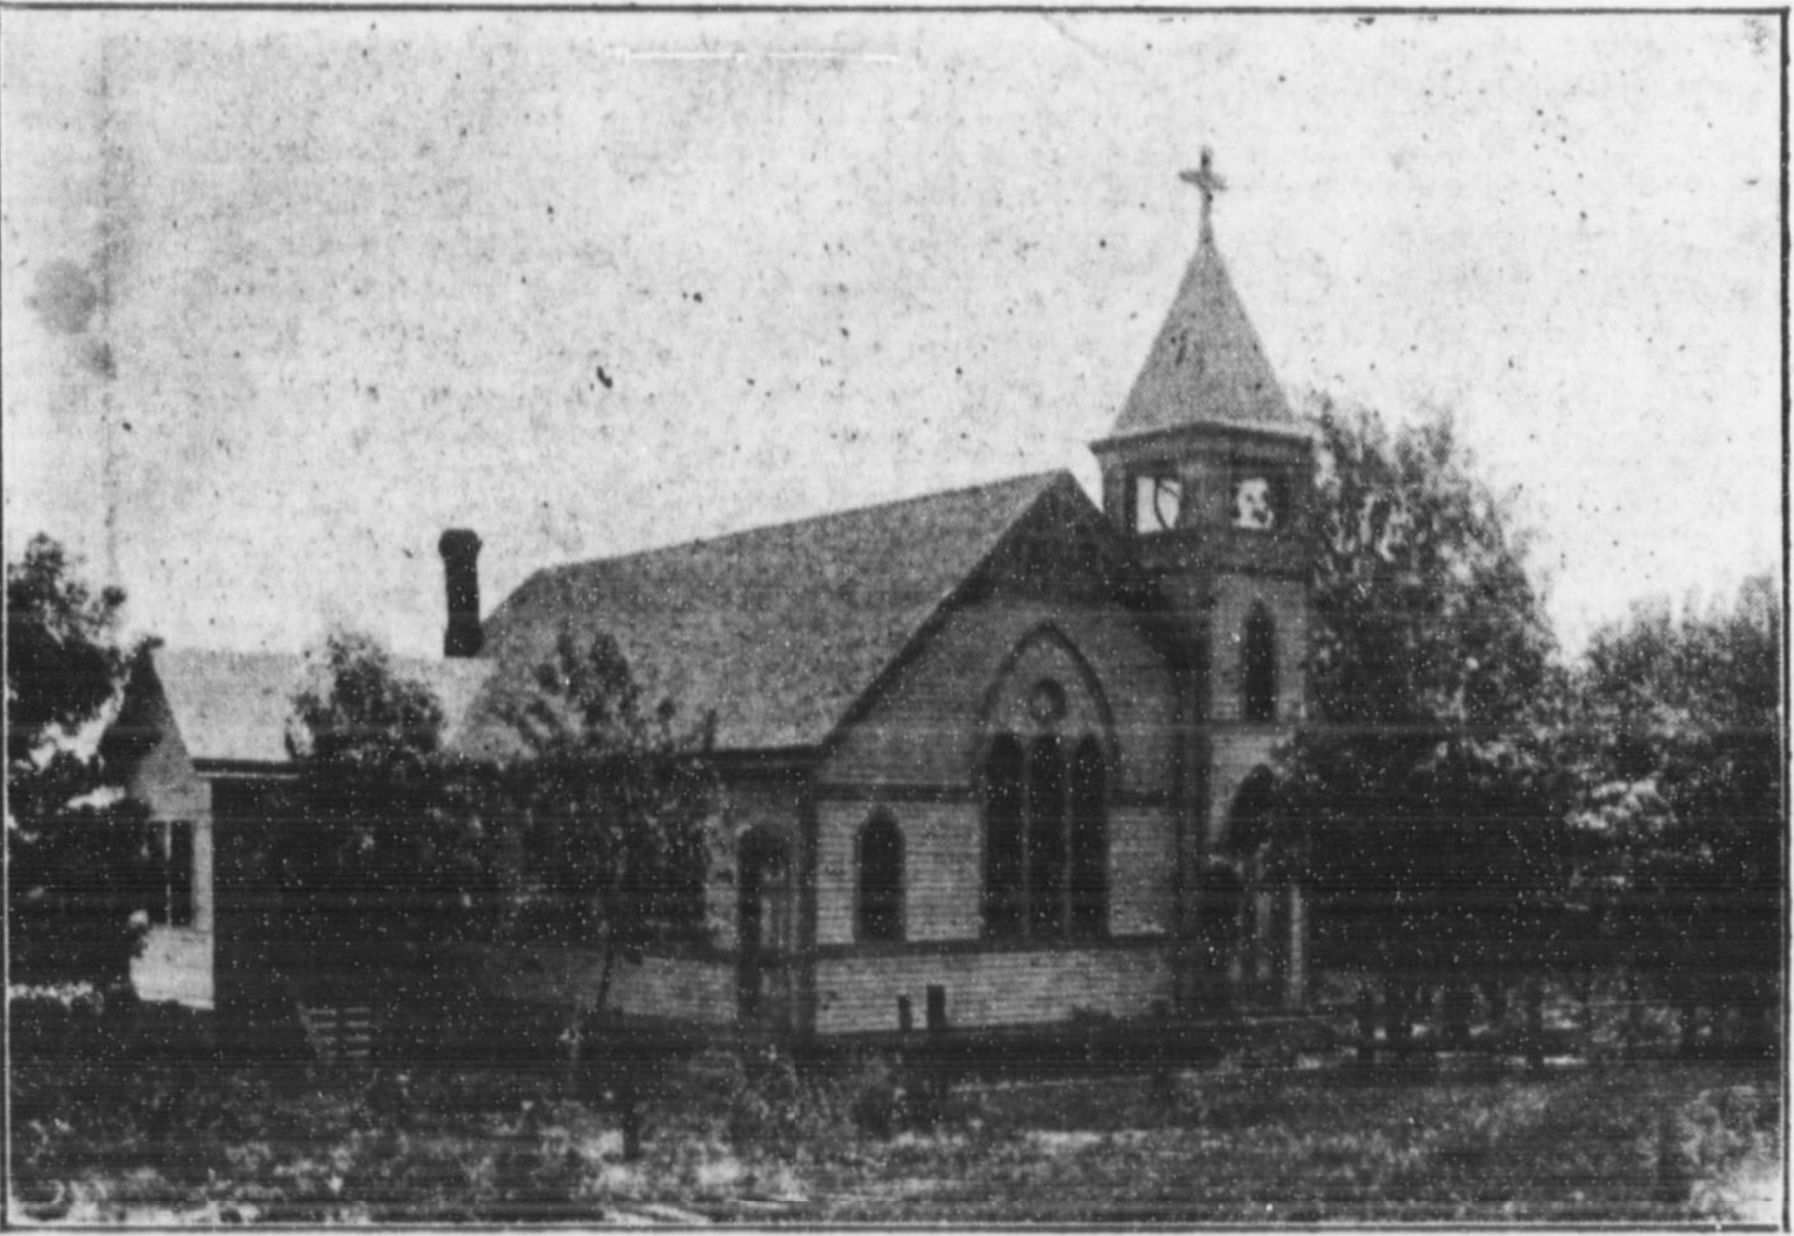 This was a church in Florence, Nebraska, in 1903.